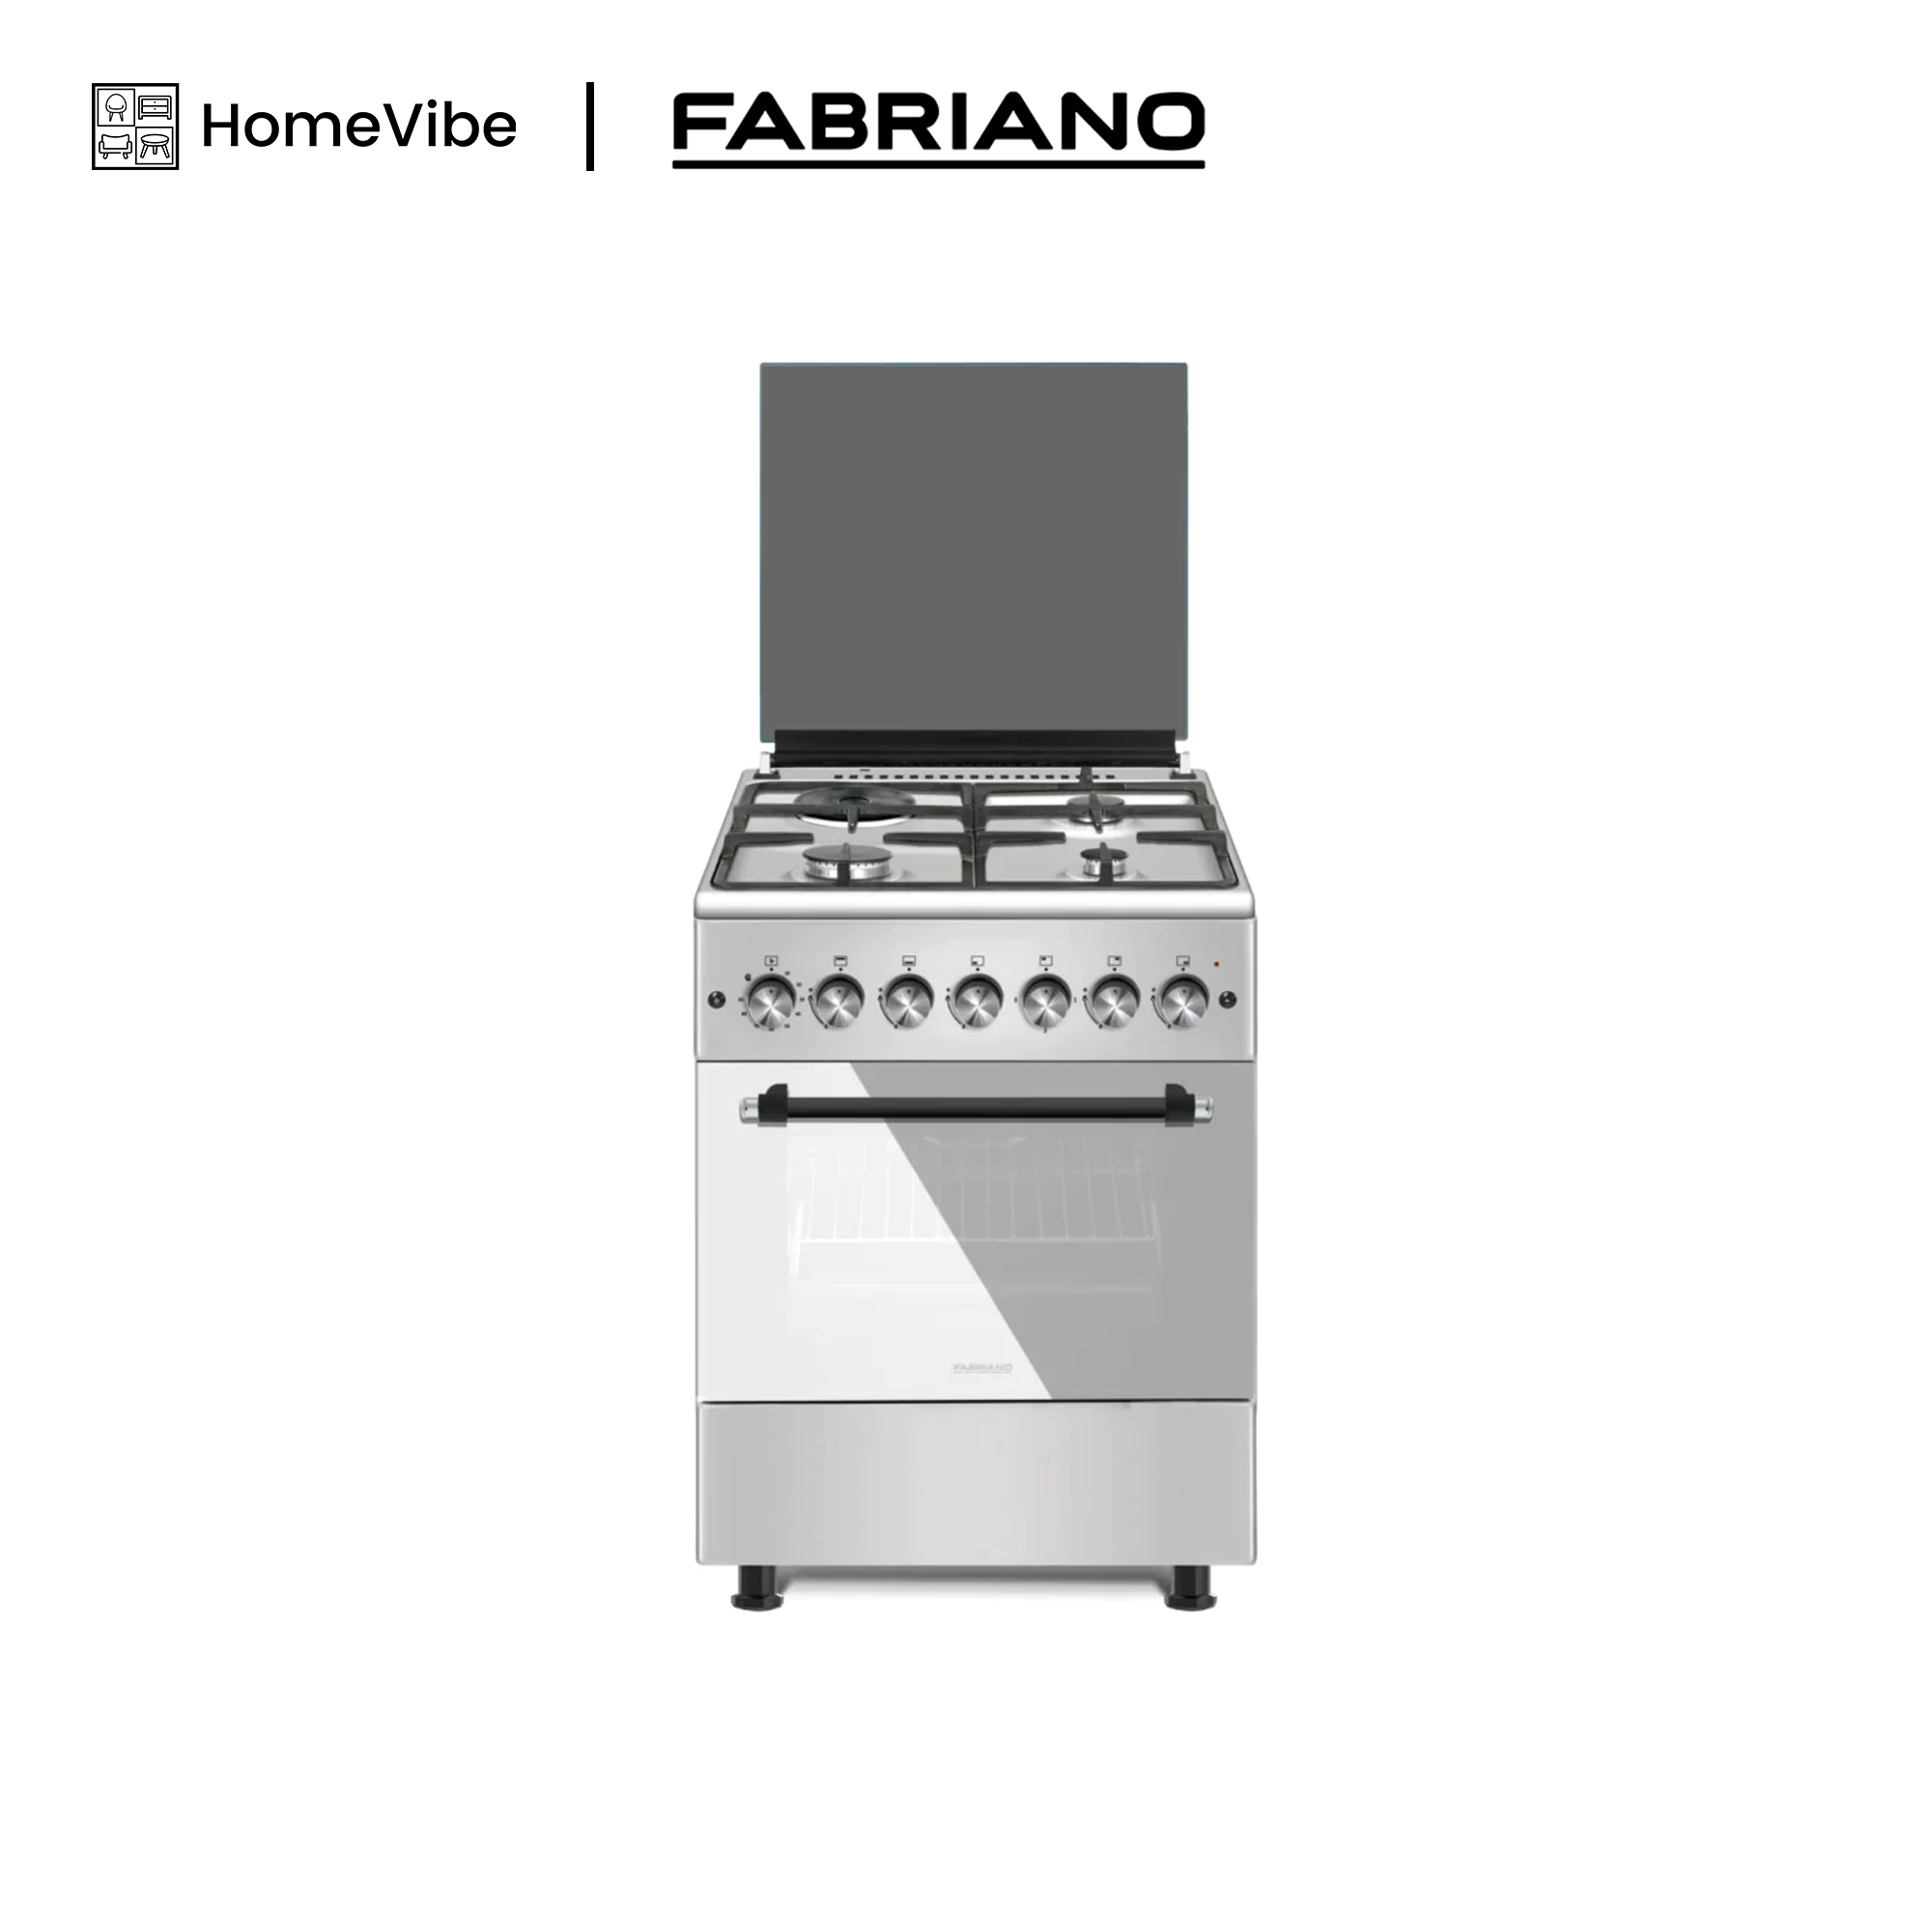 Fabriano 60cm, 4 Gas Burners (1 Triple Ring) , + Gas Oven Free Standing Cooker F6TS40G2-SSW